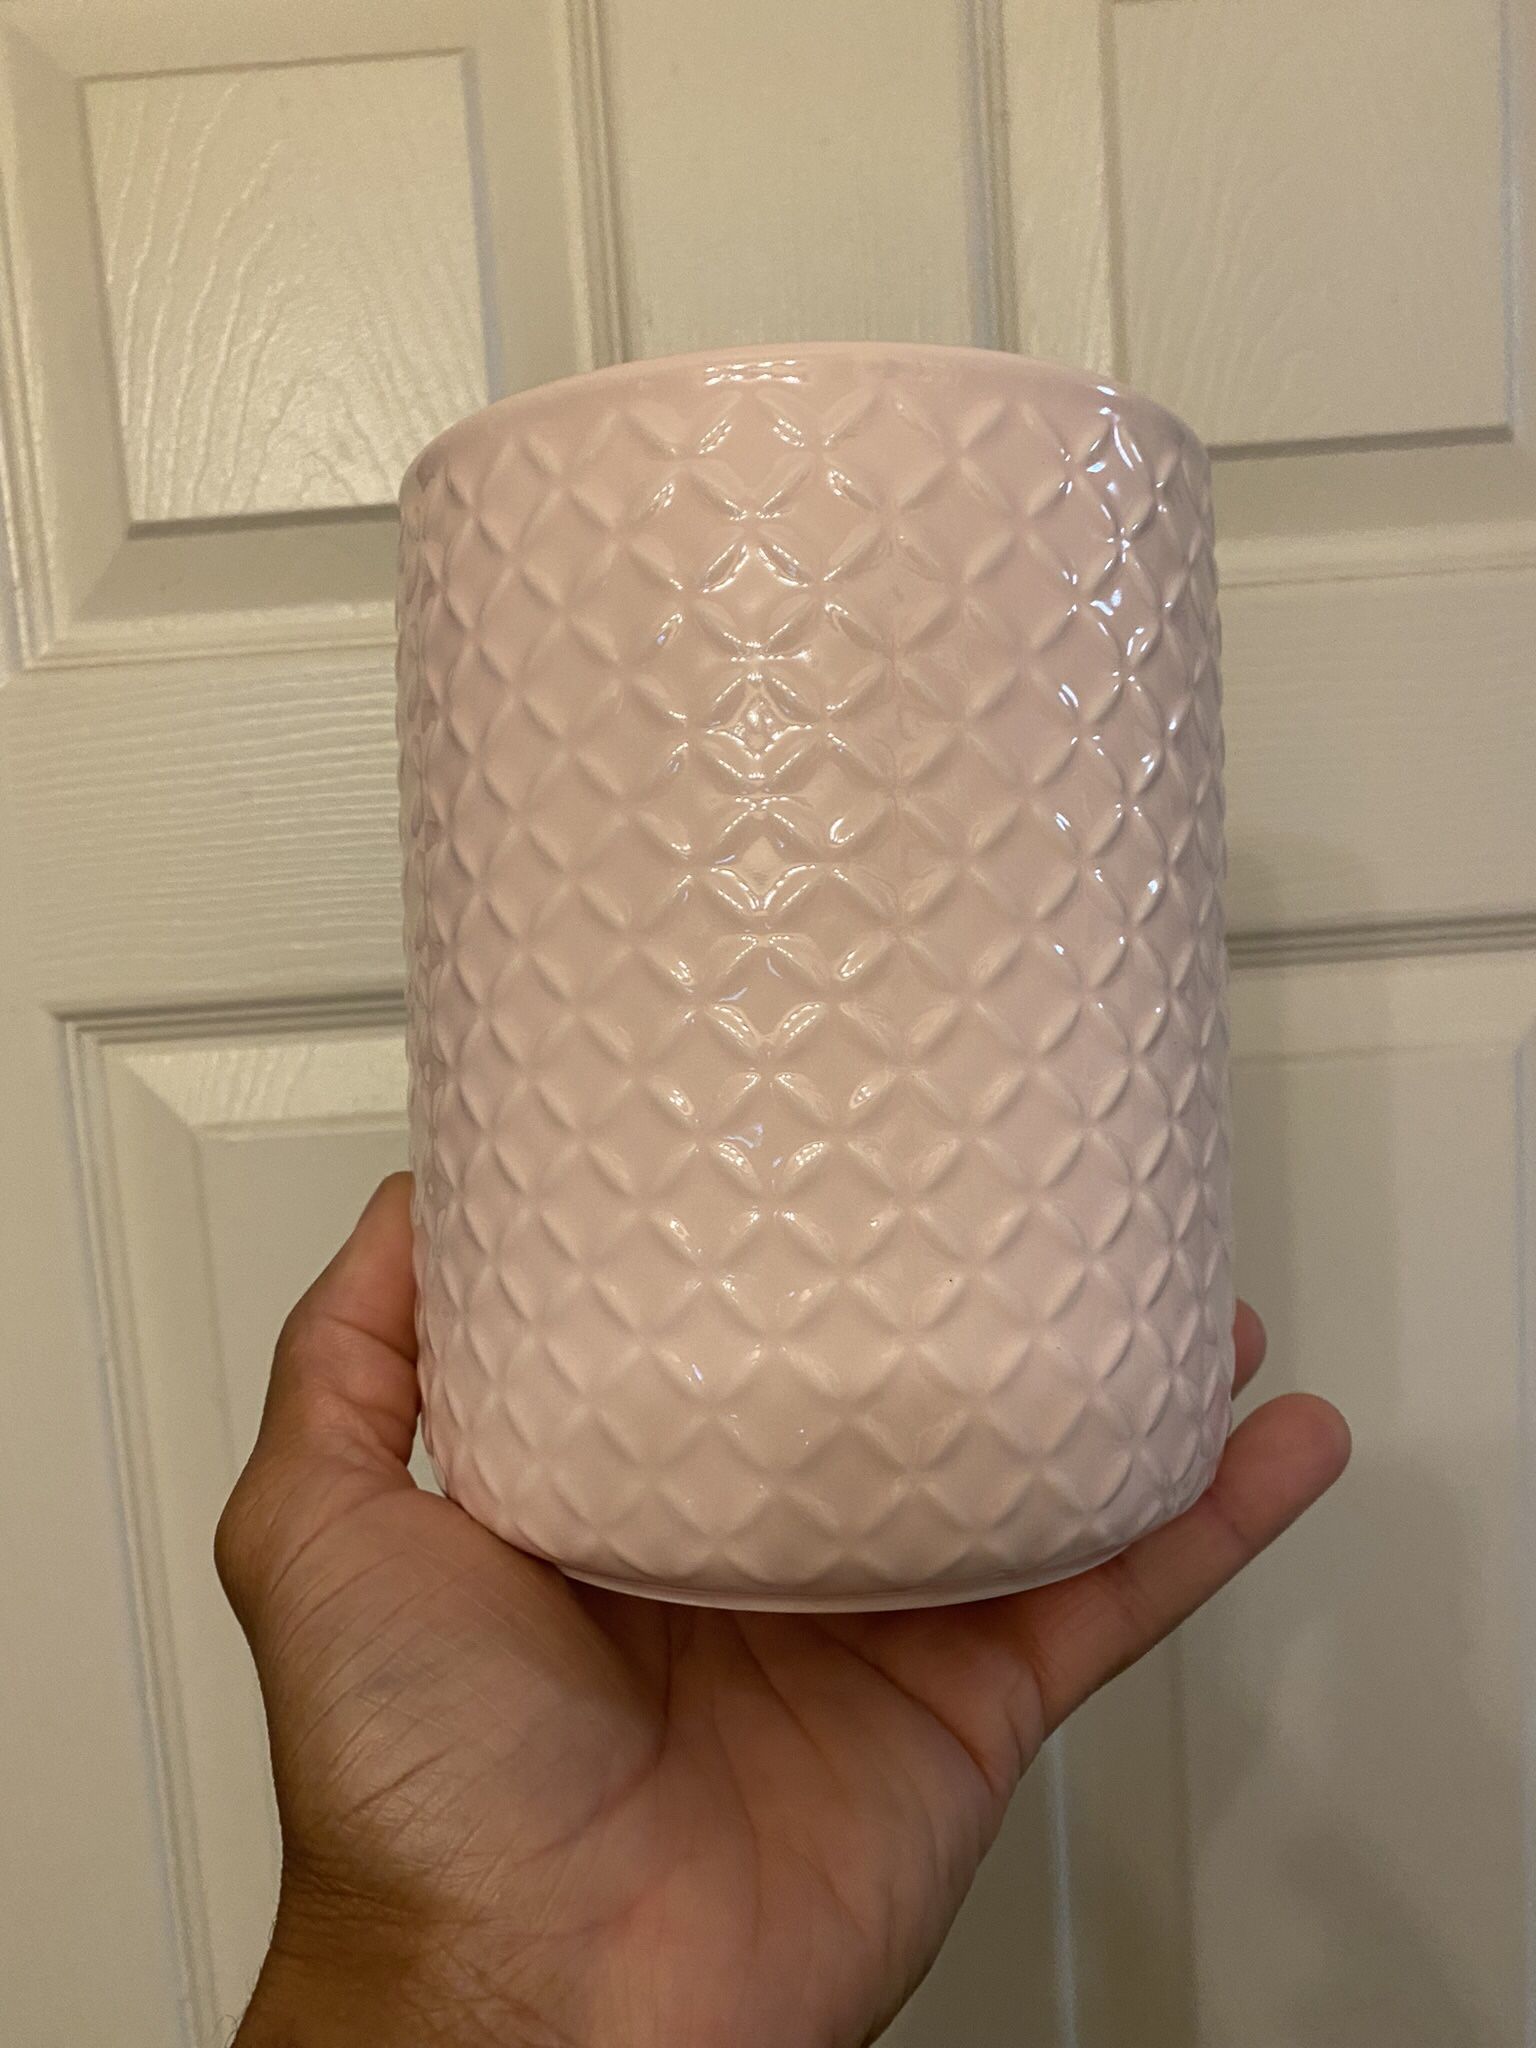 Beautiful, Soft Pink, Ceramic Planter | Tall |  High Quality | Well Made | Cache Pot | Indoor | Flowers, Plants, Succulents | 5” Wide, 7” Tall